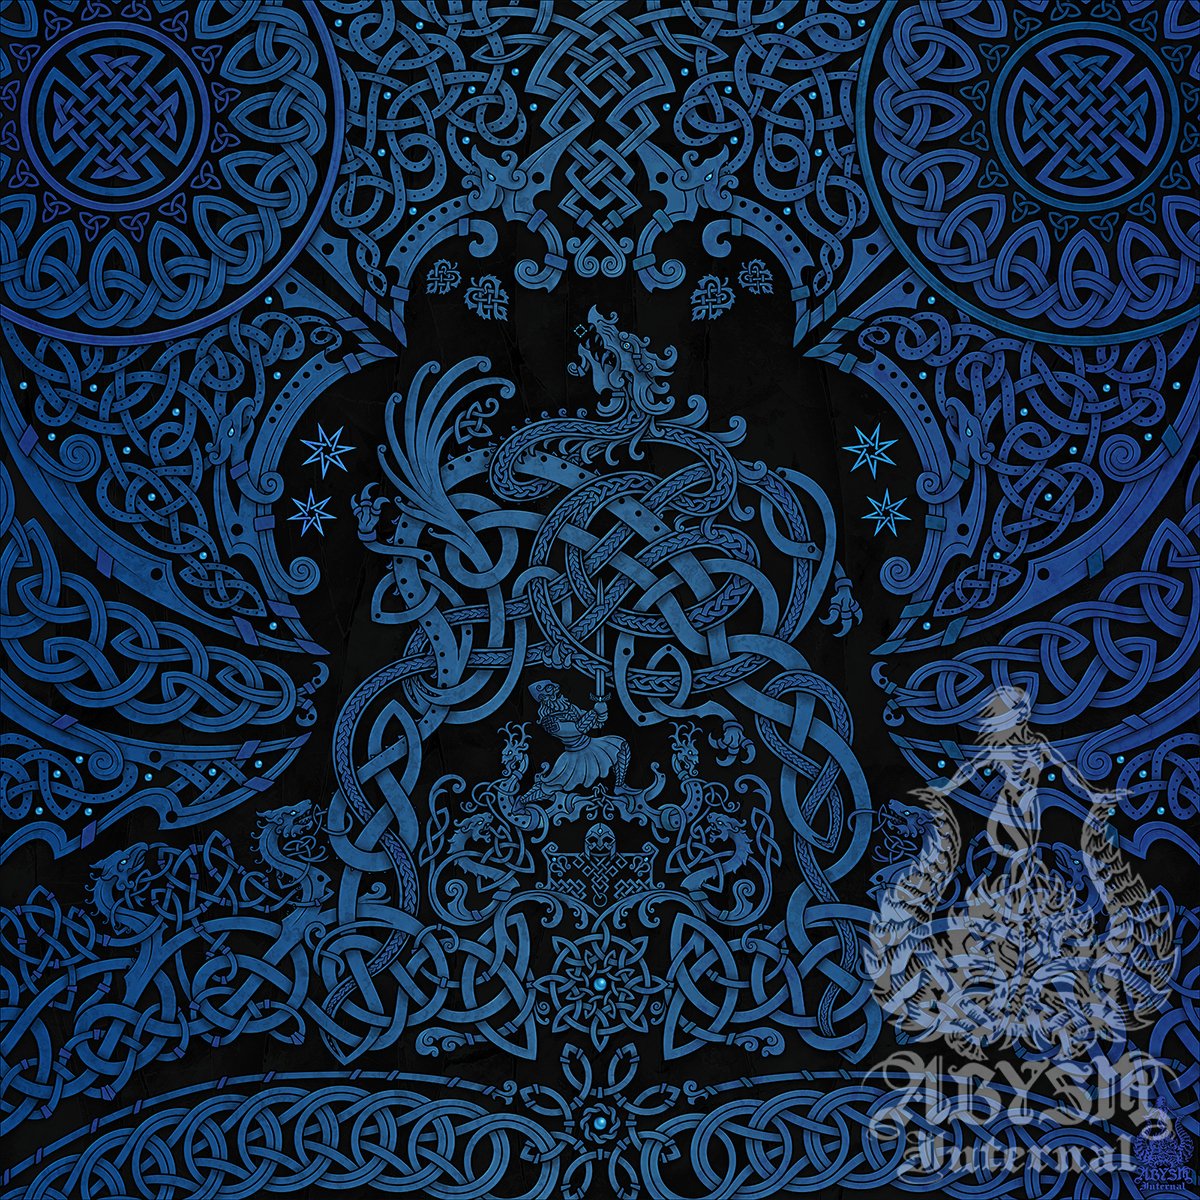 Custom intricate Knotwork art, Viking or Celtic personalized illustration for covers, fabrics and banners - Abysm Internal